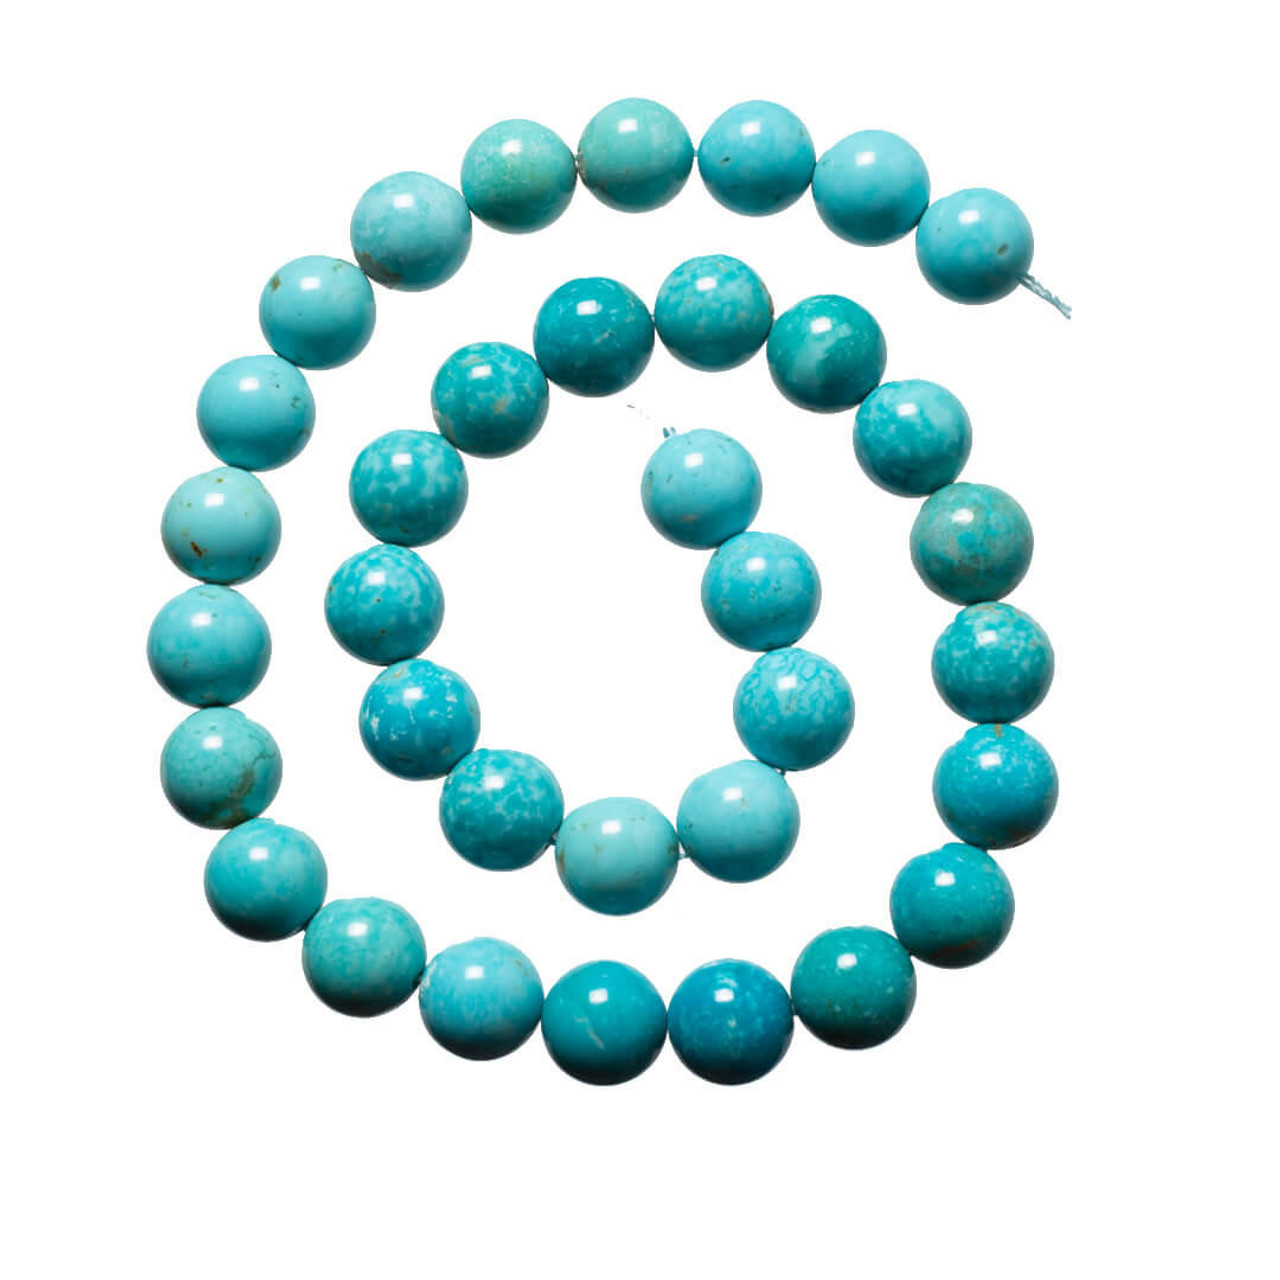 Beads Sonoran Blue Turquoise(Mexico) 12mm -NTR12d2 